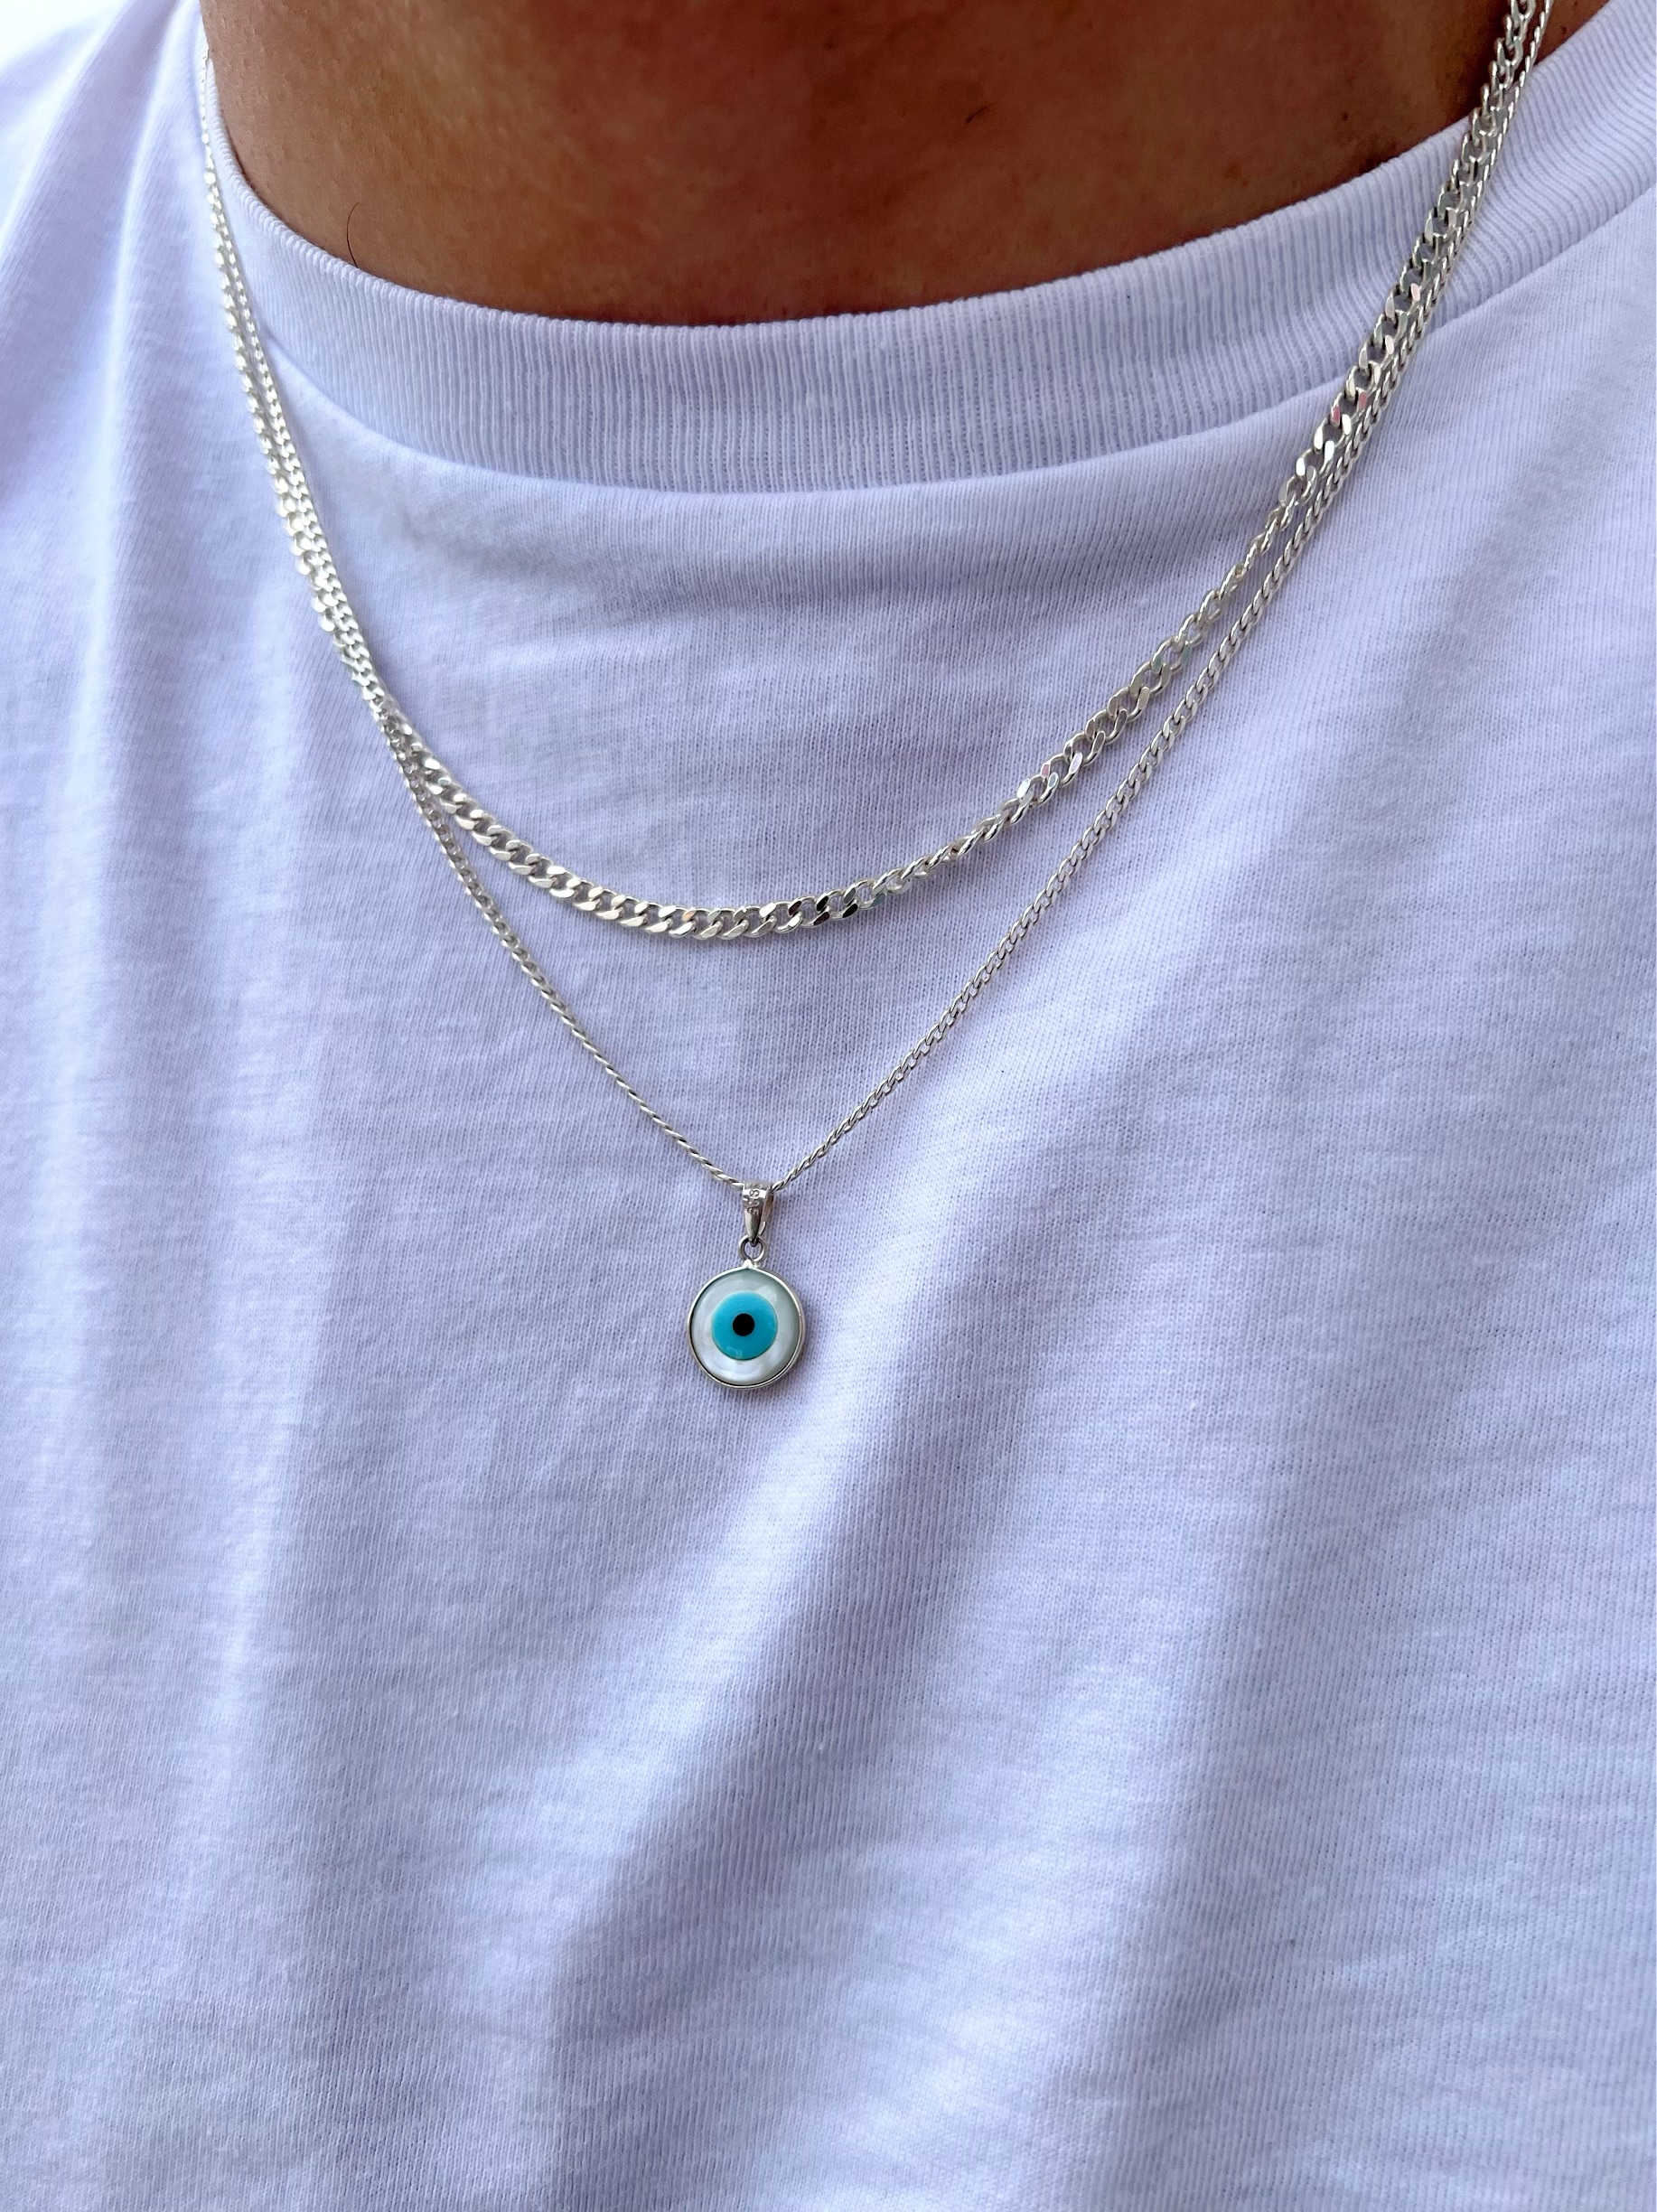 Jewelry Necklaces Men Necklaces Silver Chain Evil Eye Necklace